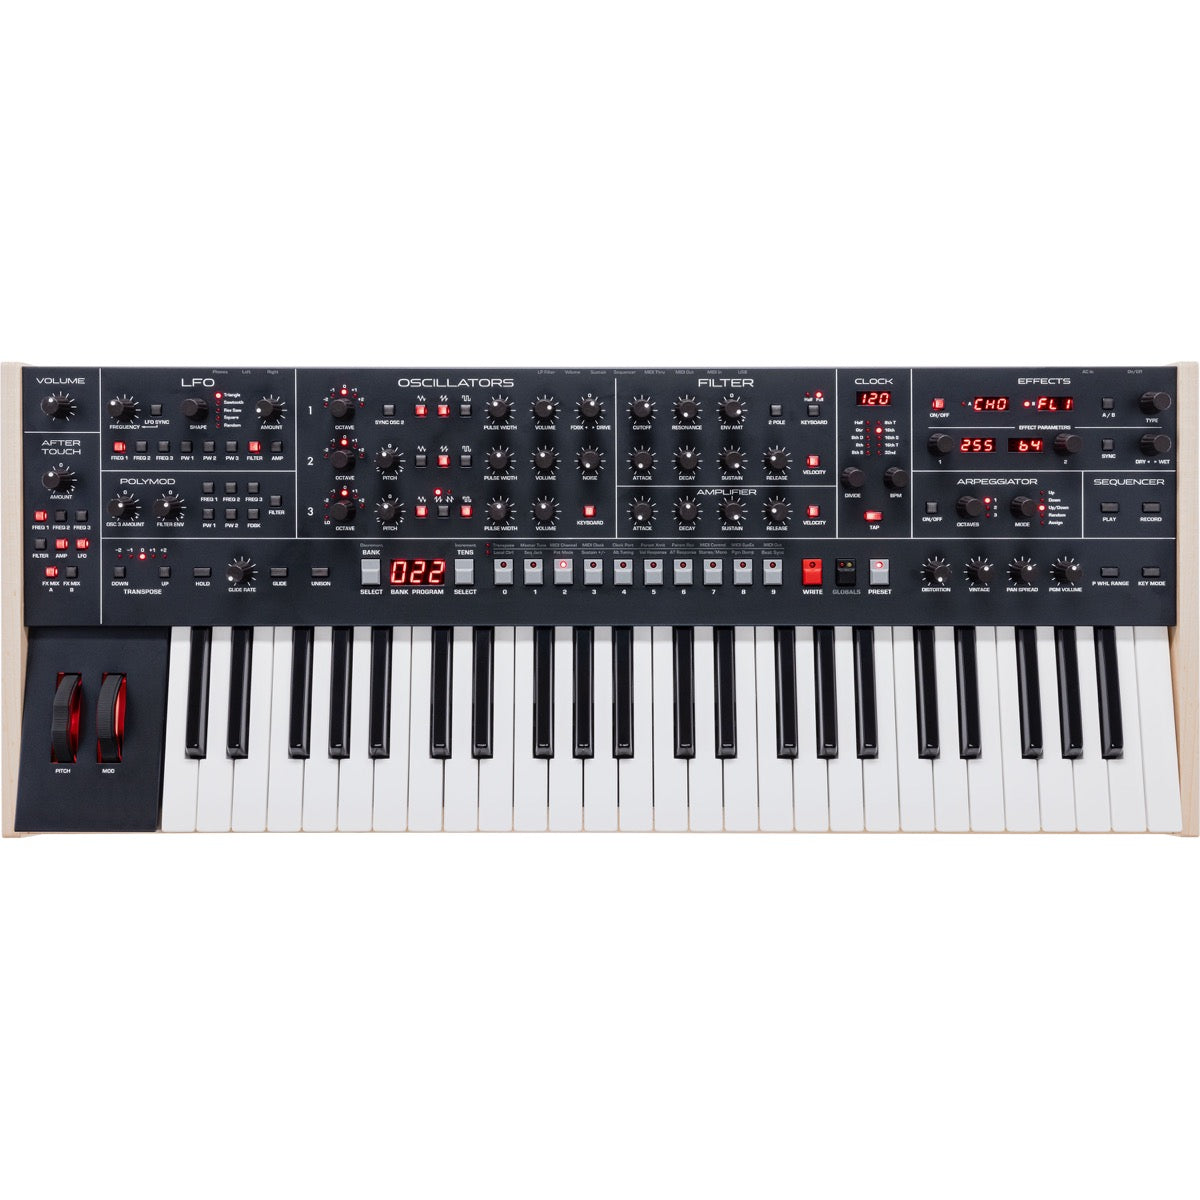 Sequential Trigon-6 Polyphonic Analog Synthesizer View 1